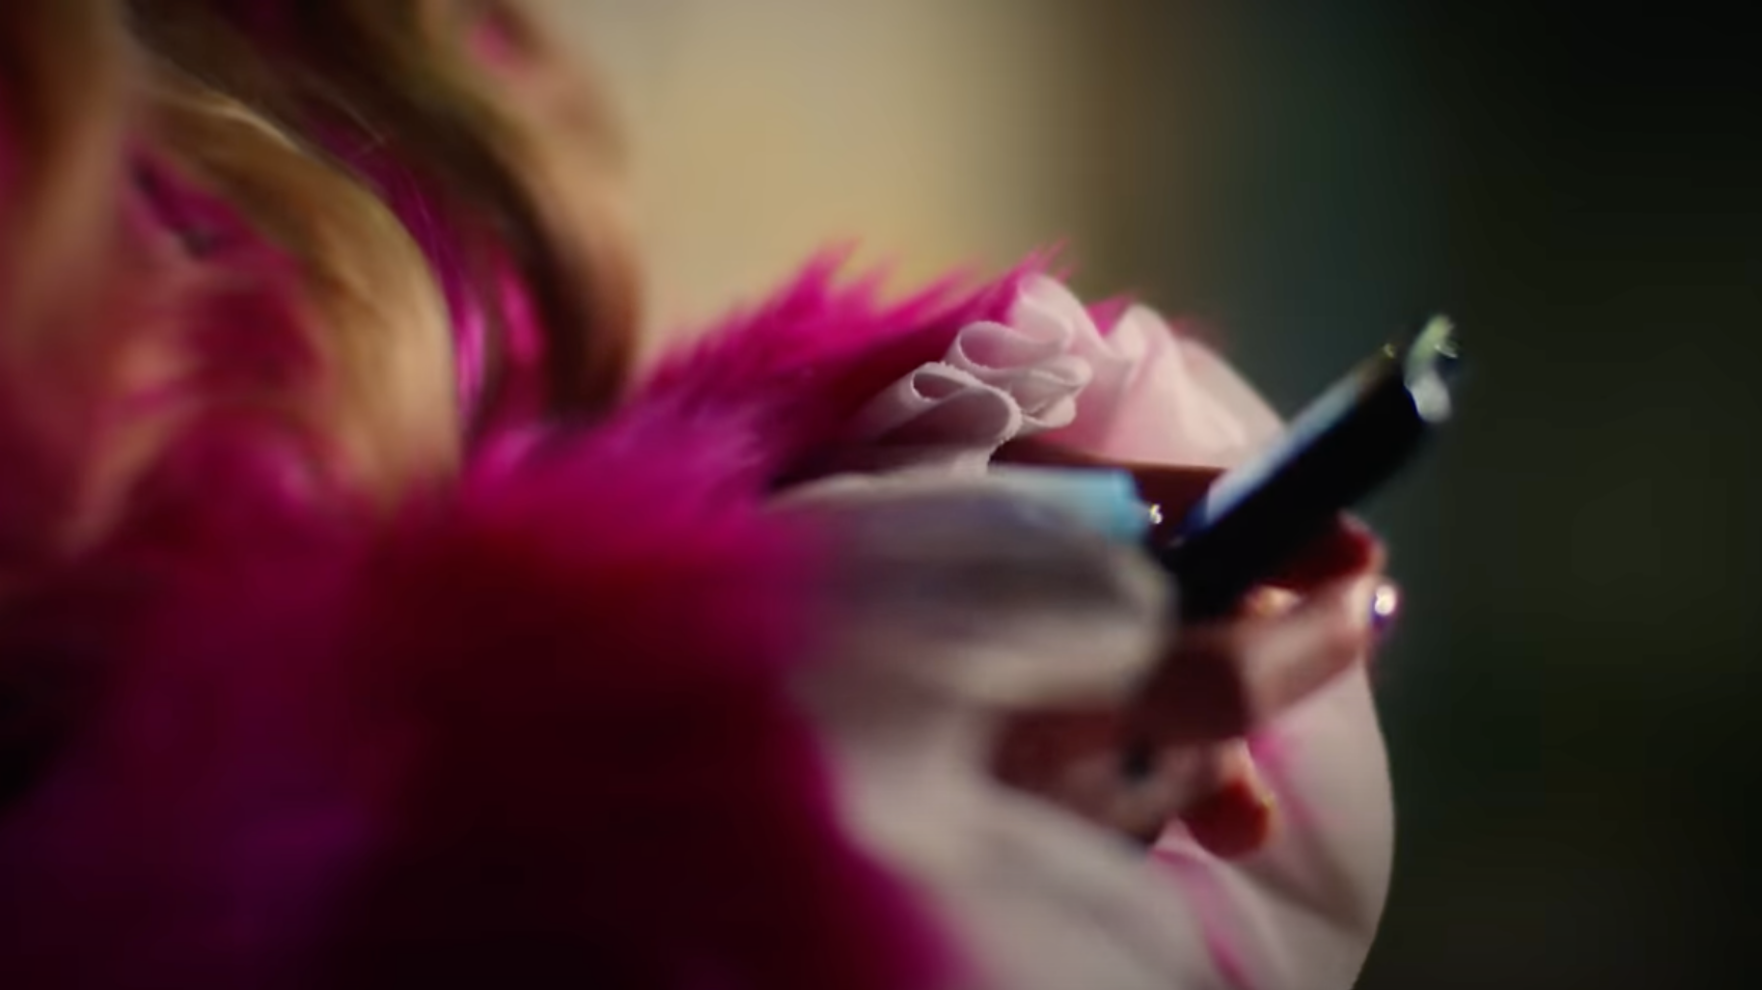 THAT PINK COAT FROM BECKY HILL'S "LAST TIME" VIDEO